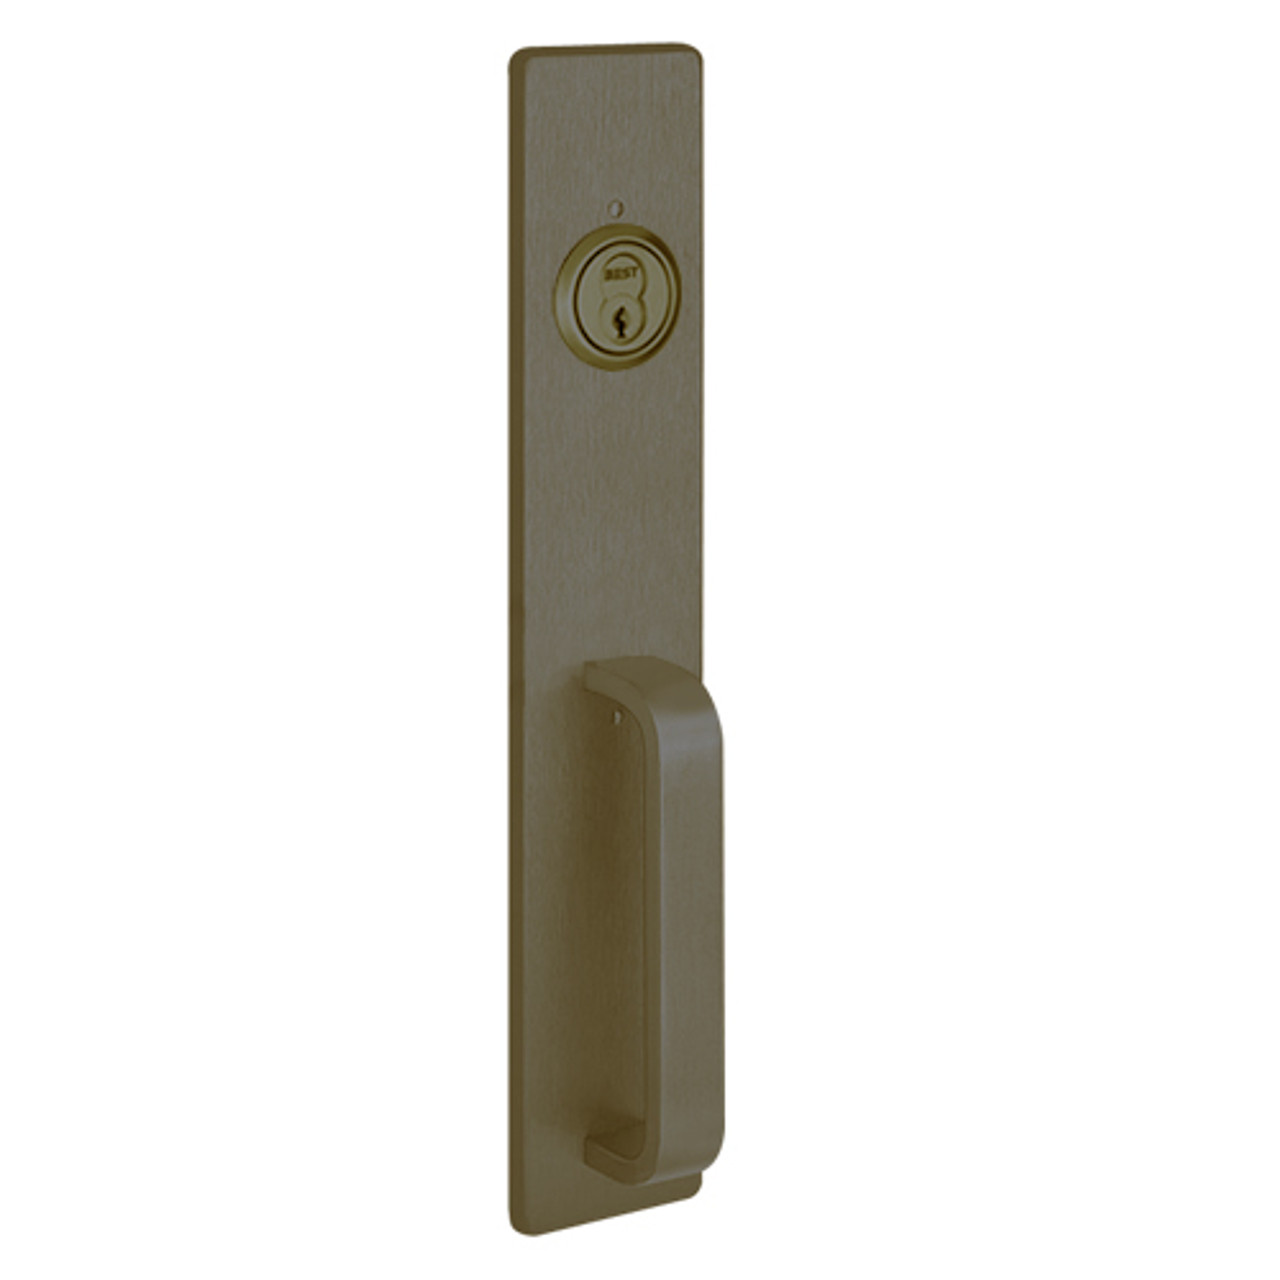 C1703A-613 PHI Key Retracts Latchbolt with A Design Pull for Apex Concealed Vertical Rod Device in Oil Rubbed Bronze Finish